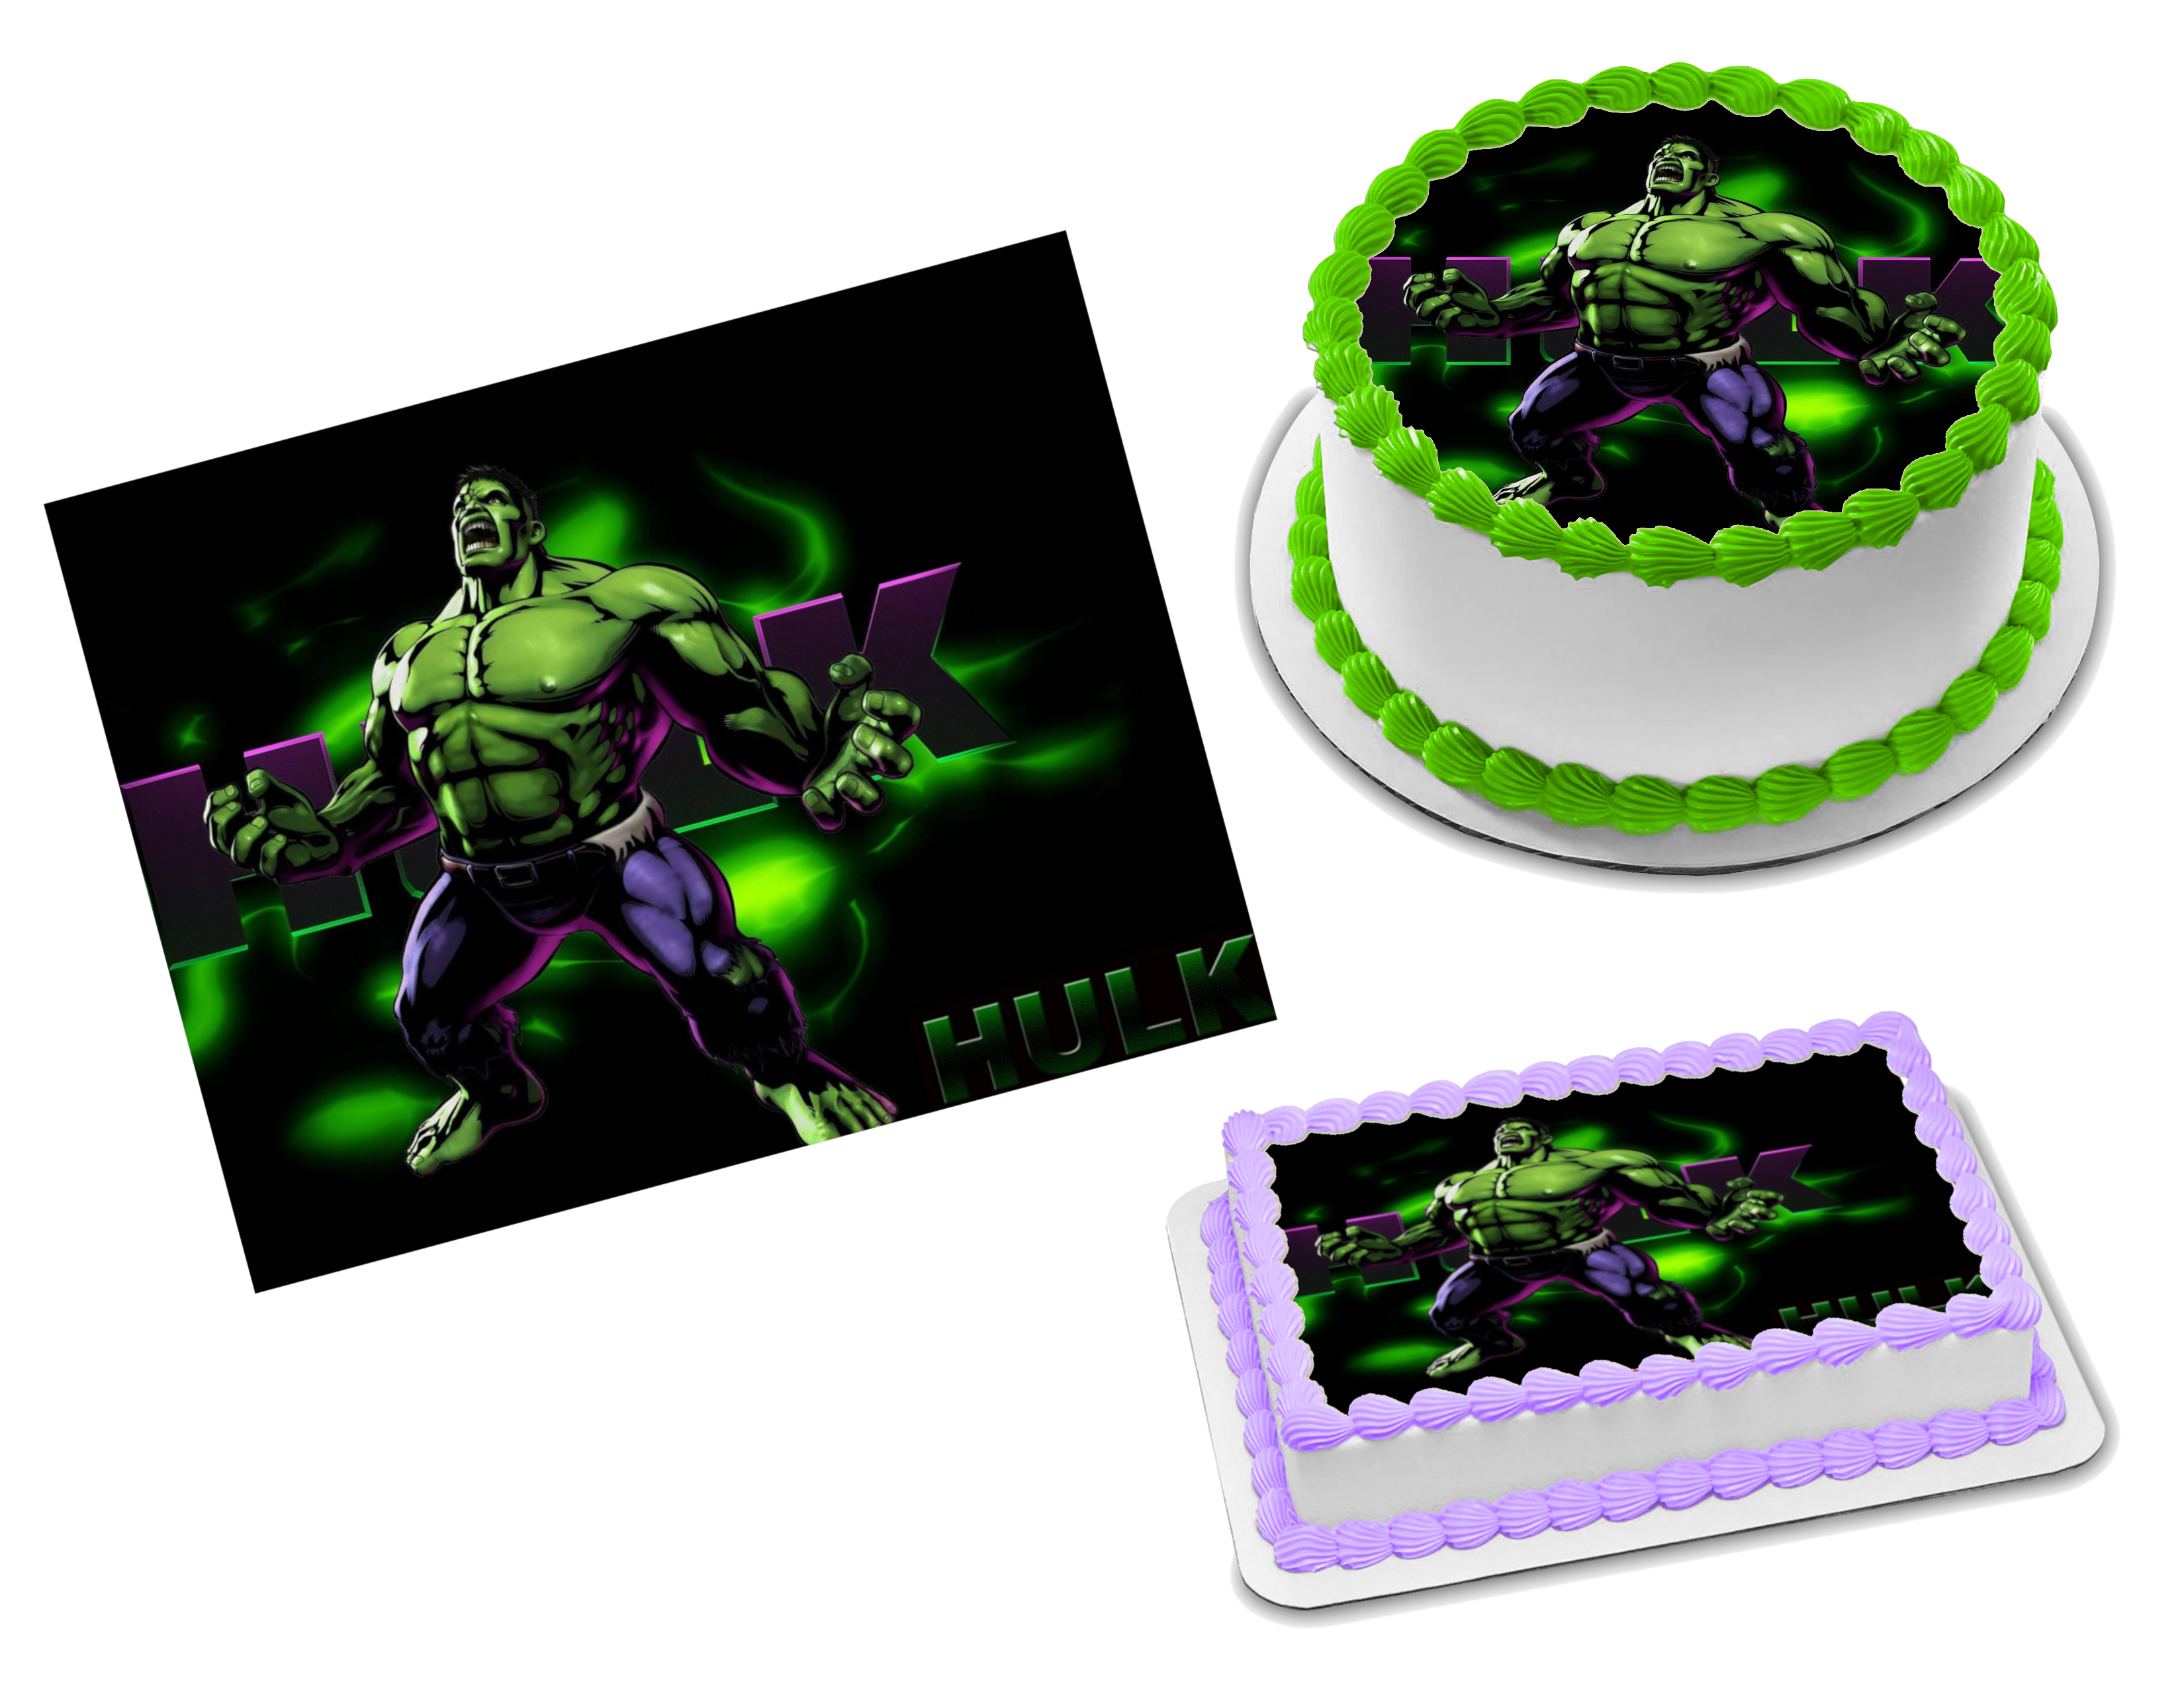 Buy Cake Toppers Super Hero Avengers INCREDIBLE HULK Birthday Cake Topper  Set with Figure and Decorative Accessories Online at Low Prices in India -  Amazon.in